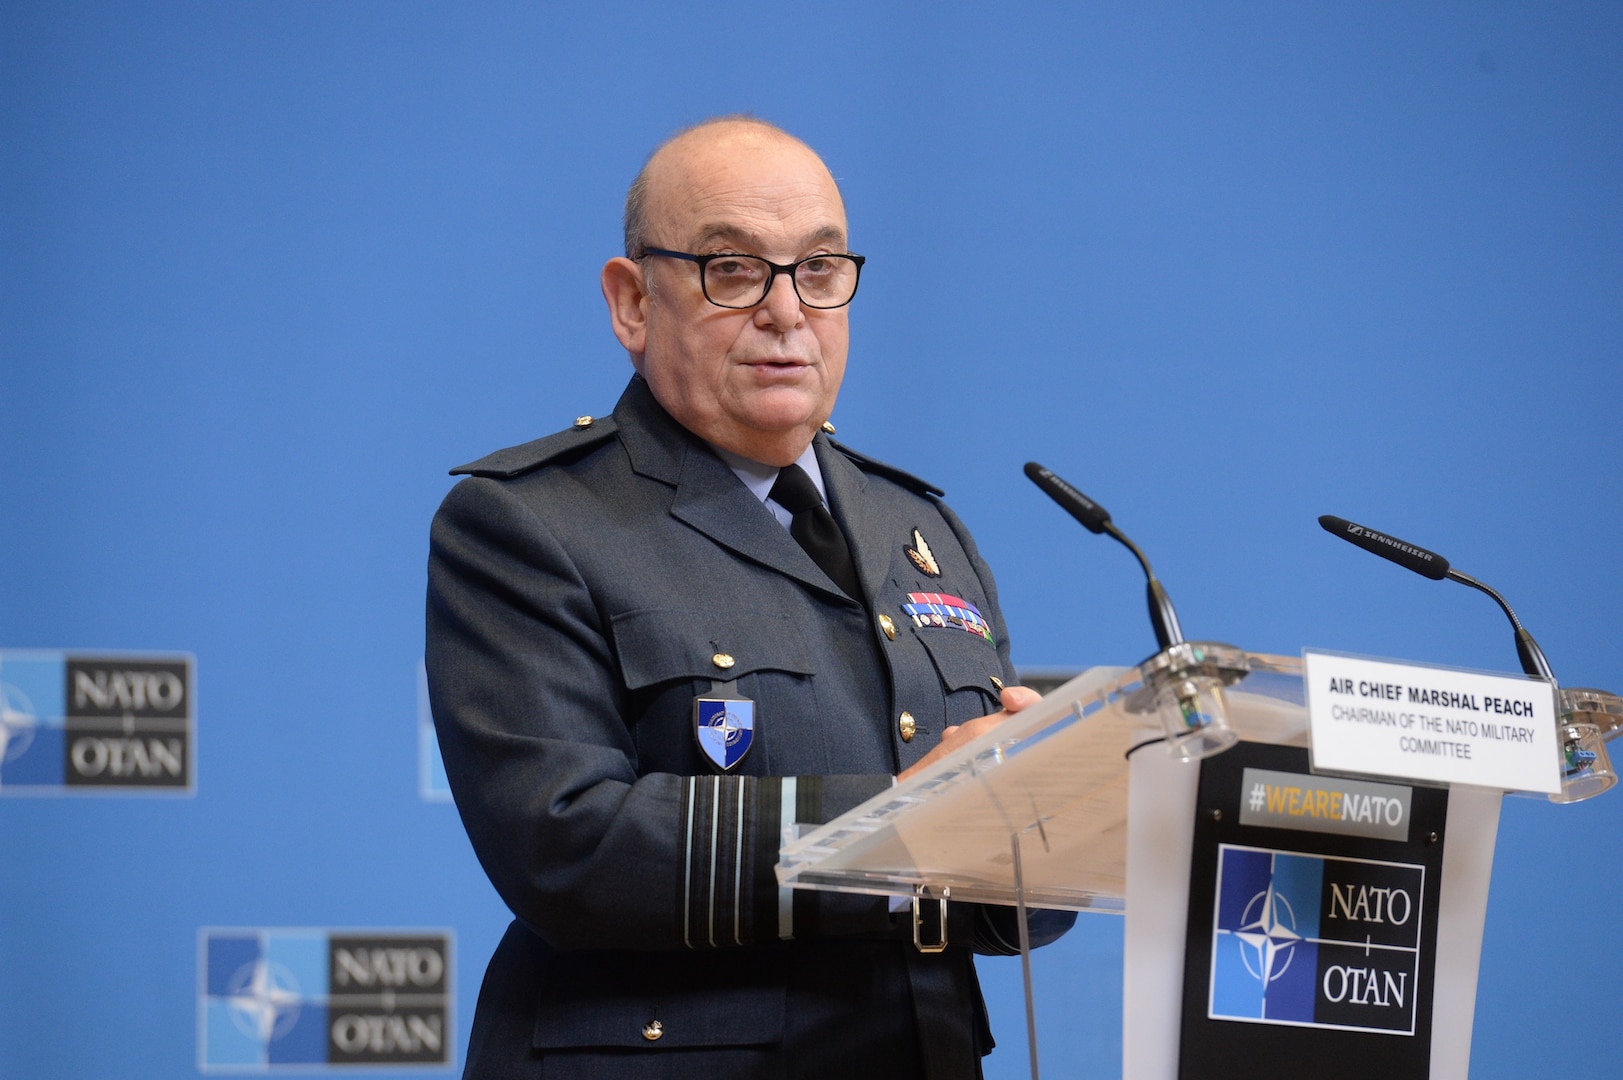 British Royal Air Force Air Chief Marshal Stuart Peach, chairman of the NATO Military Committee, addresses NATO chiefs of defense in Brussels following a meeting of the committee.